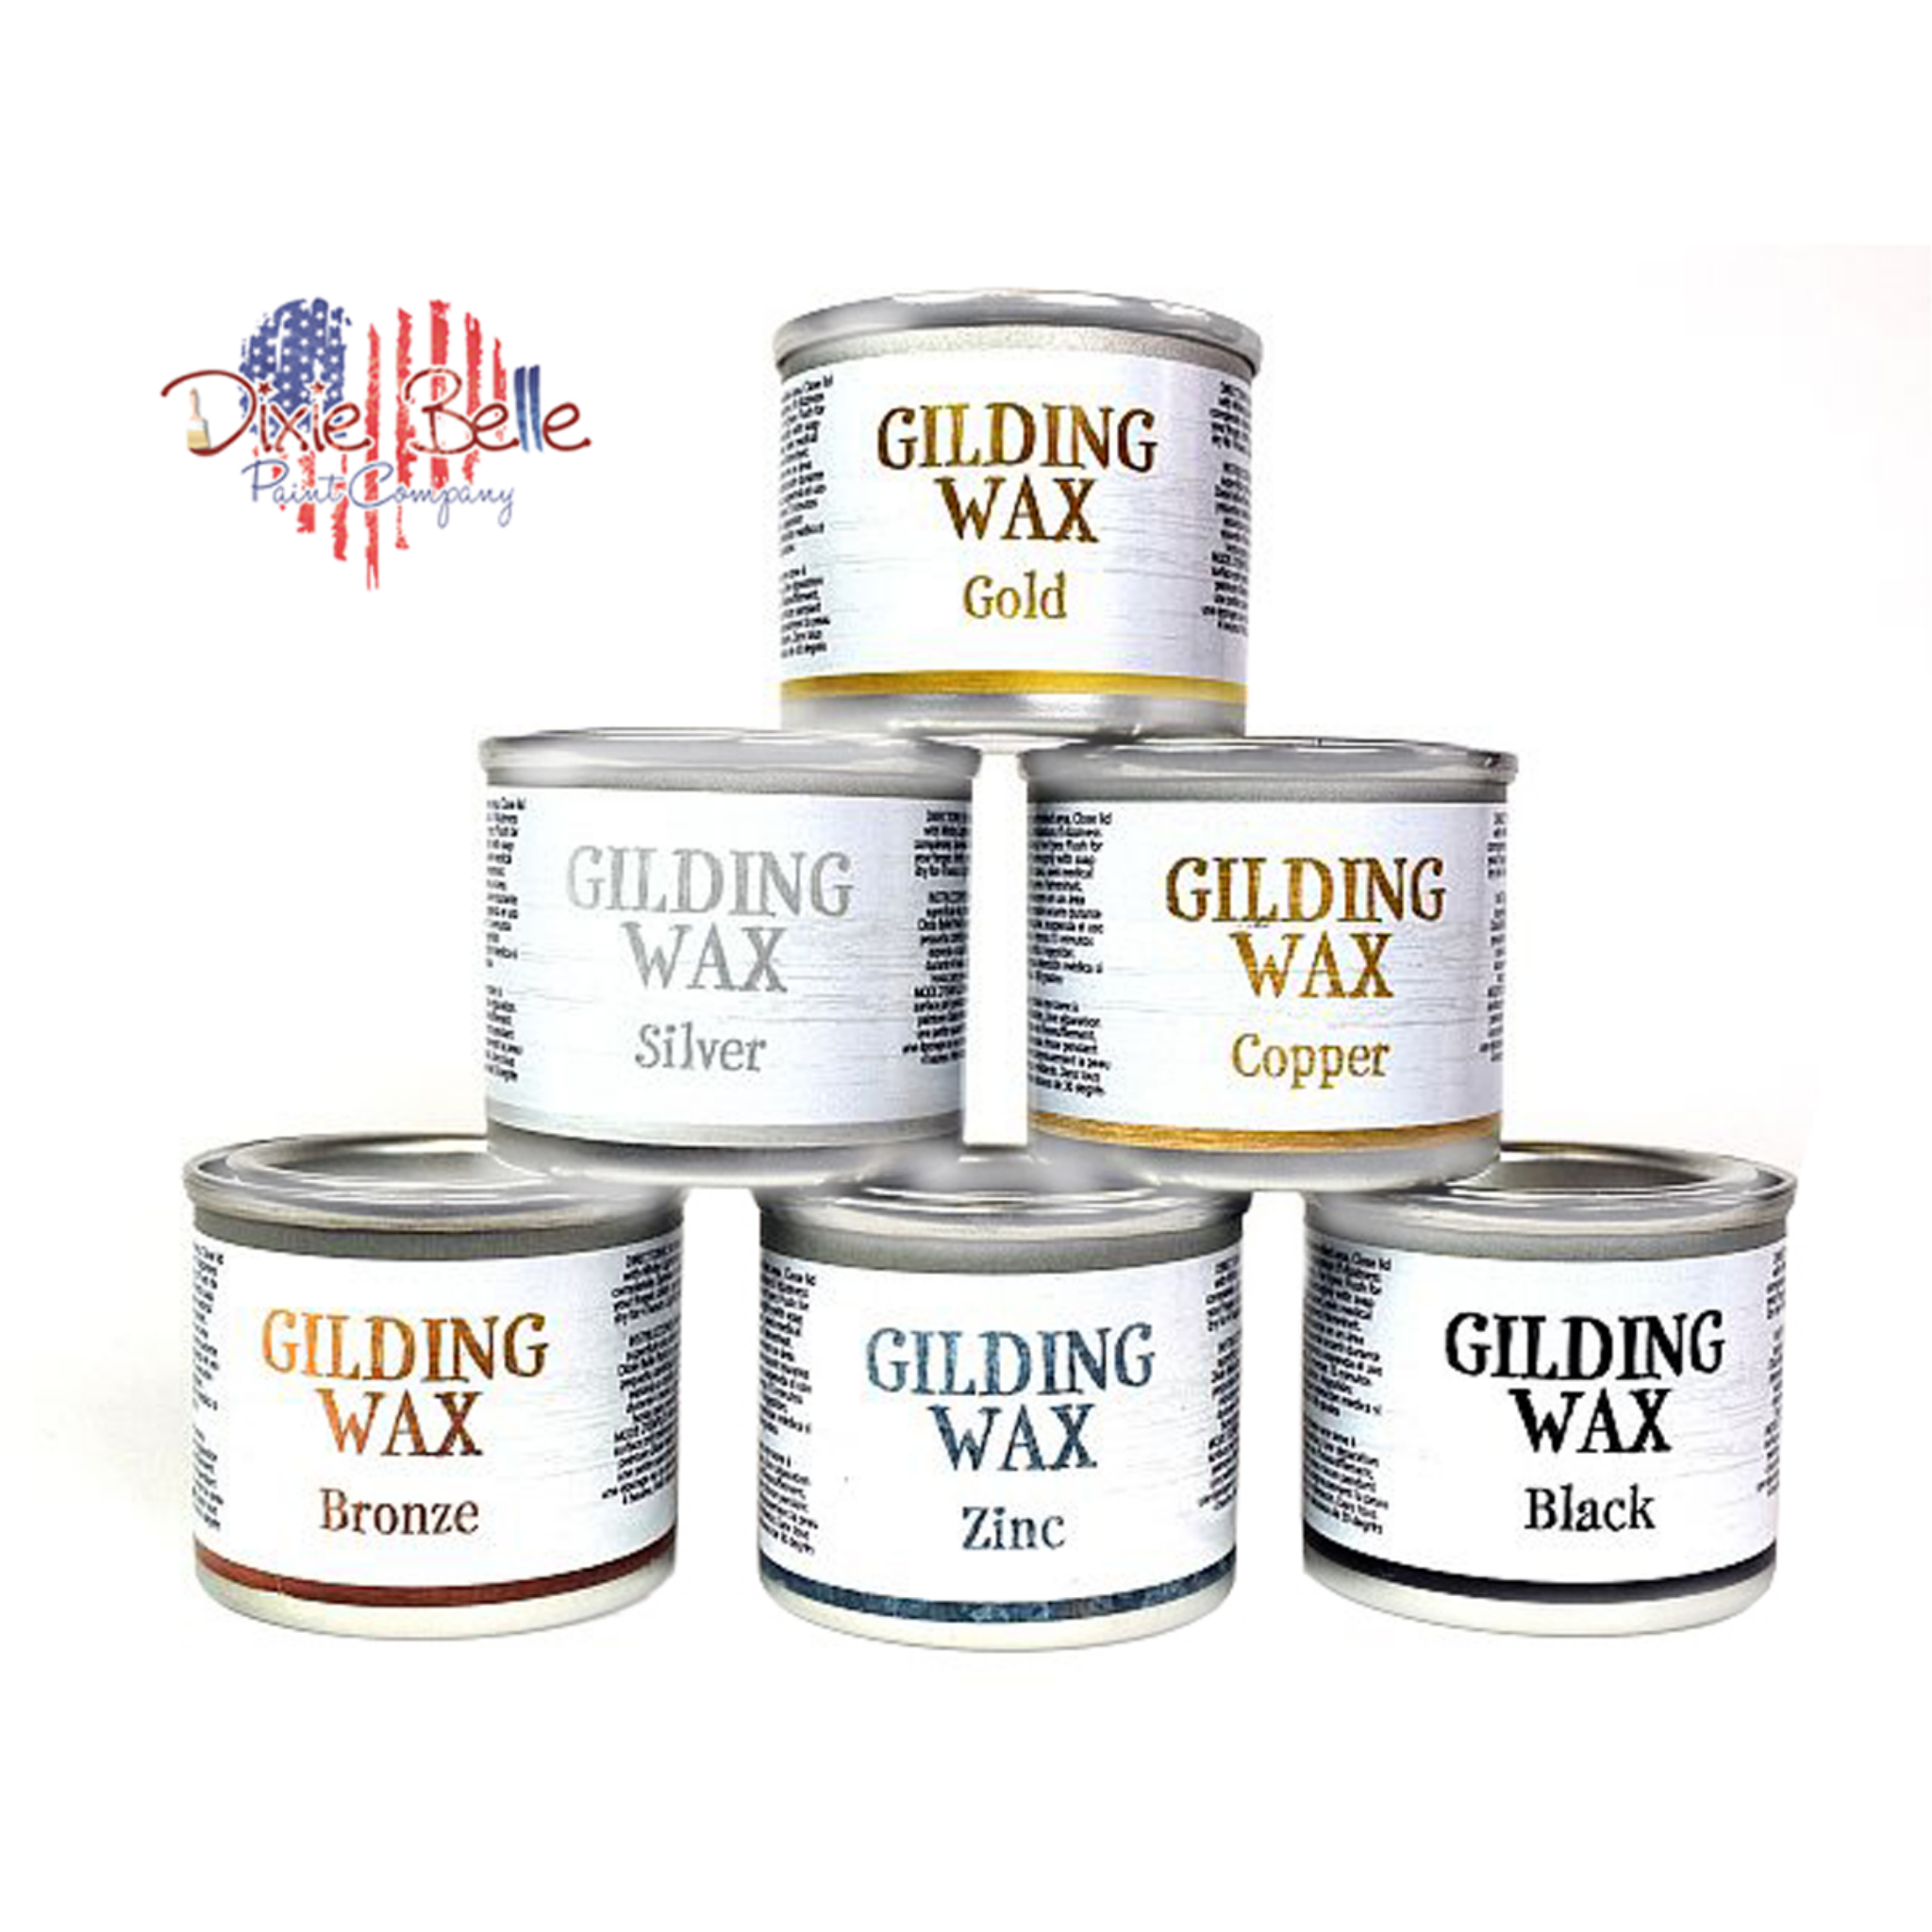 Six small cans of Dixie Belle Paint Company's Gilding Waxes in Gold, Silver, Copper, Bronze, Zinc, and Black are against a white background. 